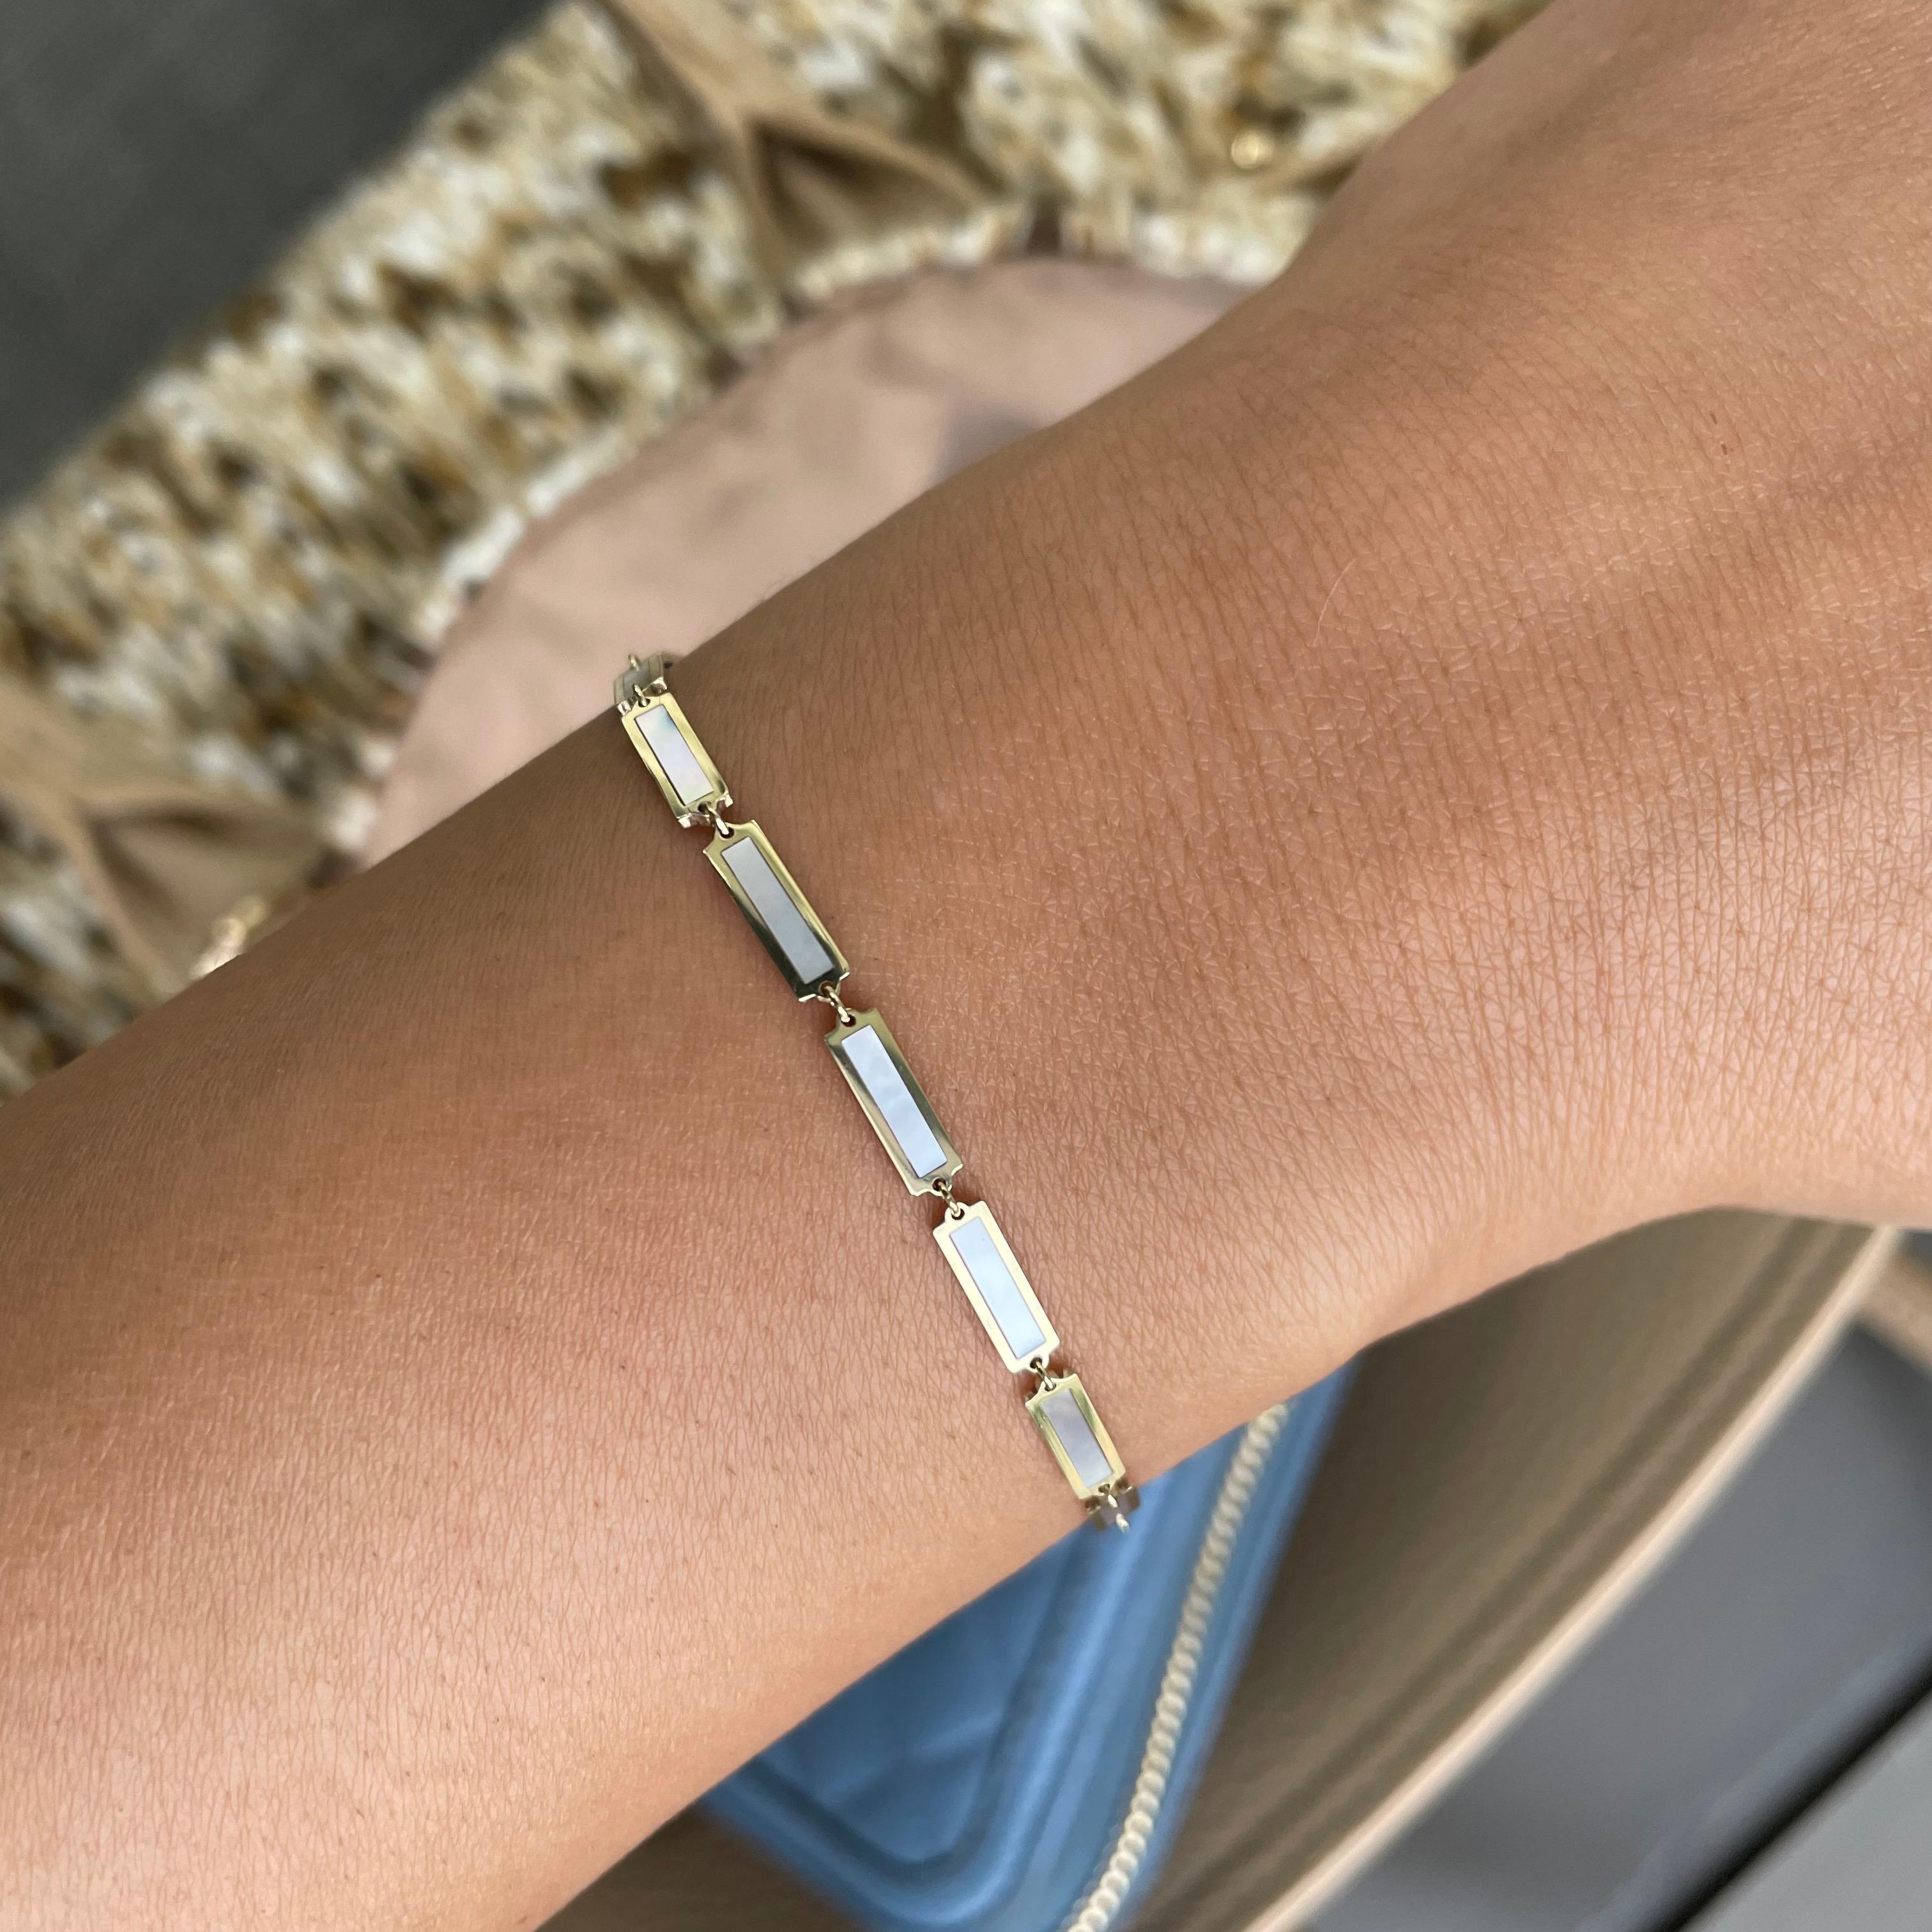 Quality Gemstone Bar Bracelet: Focused on design and detail, these beautiful colored gemstone bracelet of your choice features a station bar design and Is crafted of 14k yellow gold. Bracelet measurement is 7